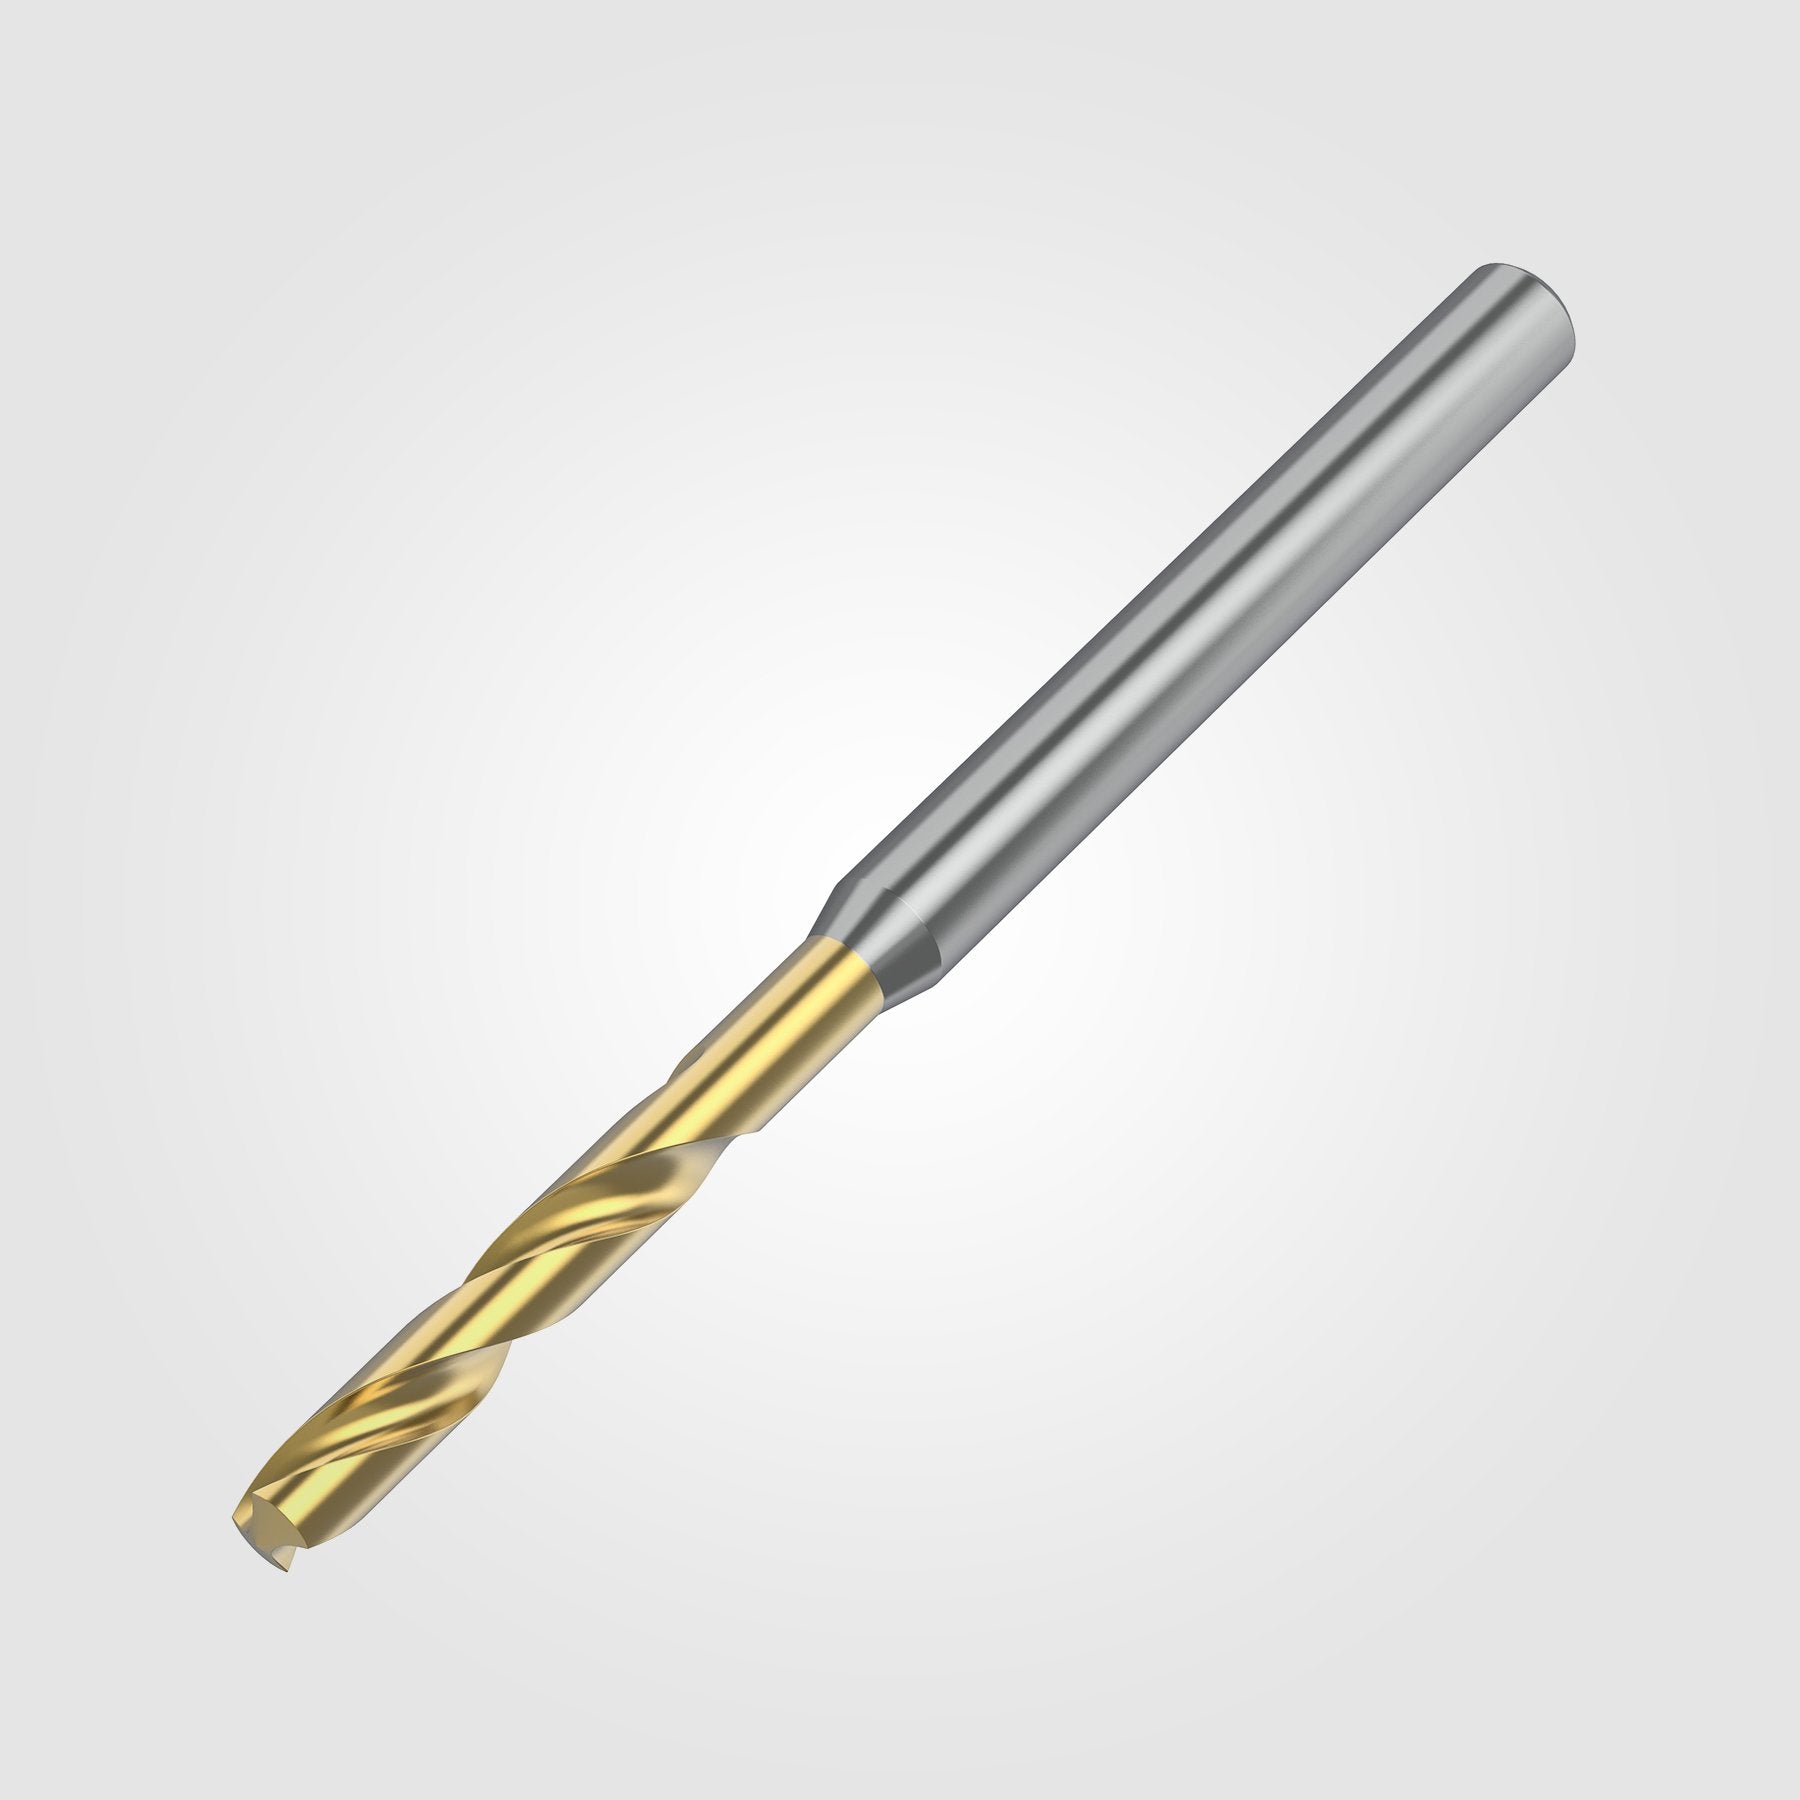 GOdrill (THROUGH COOLANT) | 5.4mm / .2126" / 3xD | SOLID CARBIDE DRILL | 4151140